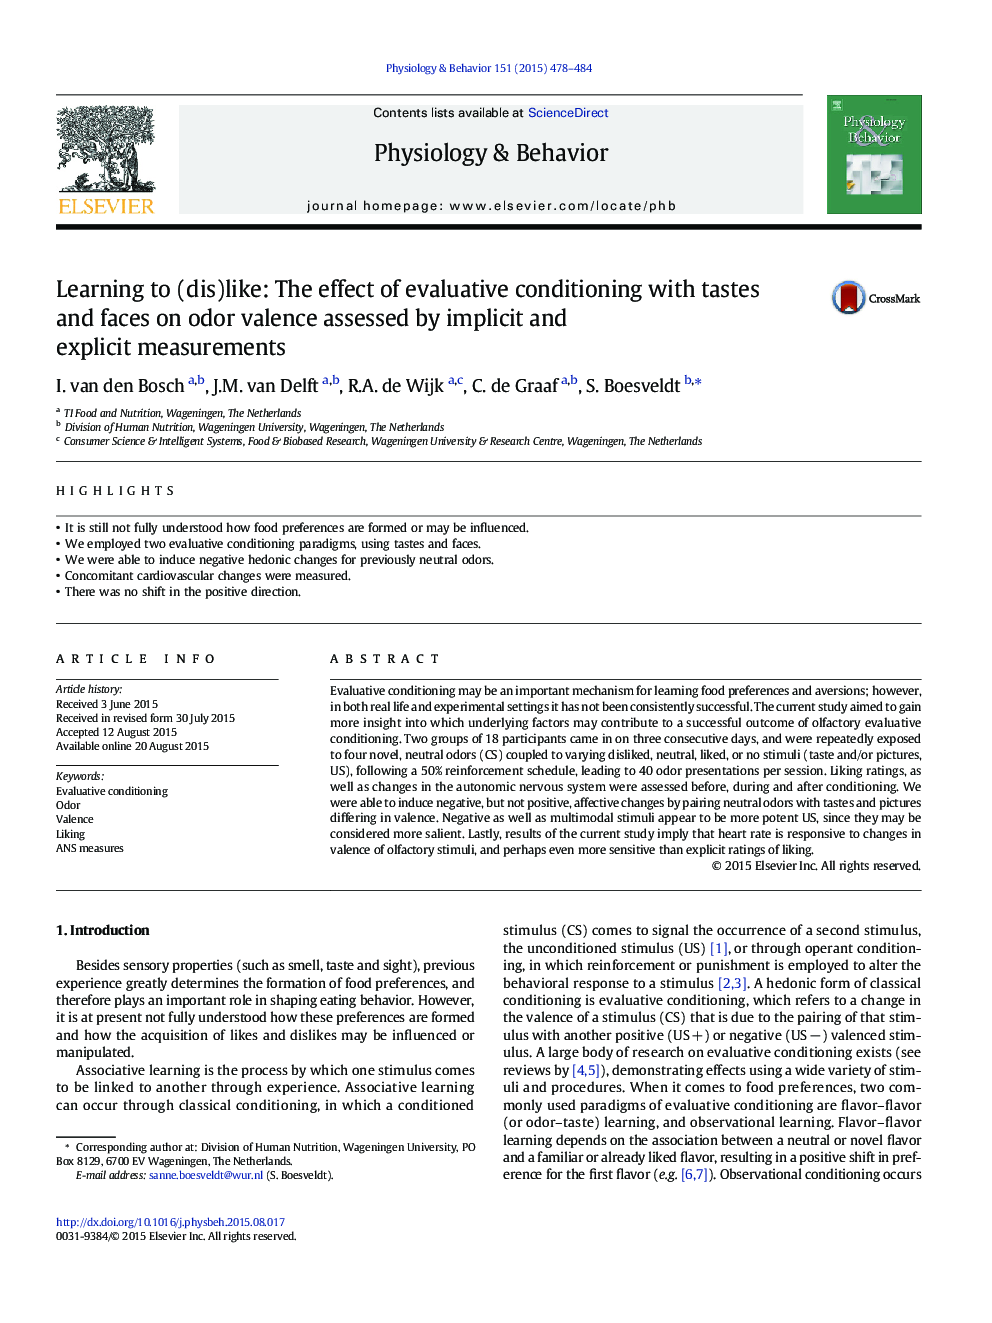 Learning to (dis)like: The effect of evaluative conditioning with tastes and faces on odor valence assessed by implicit and explicit measurements